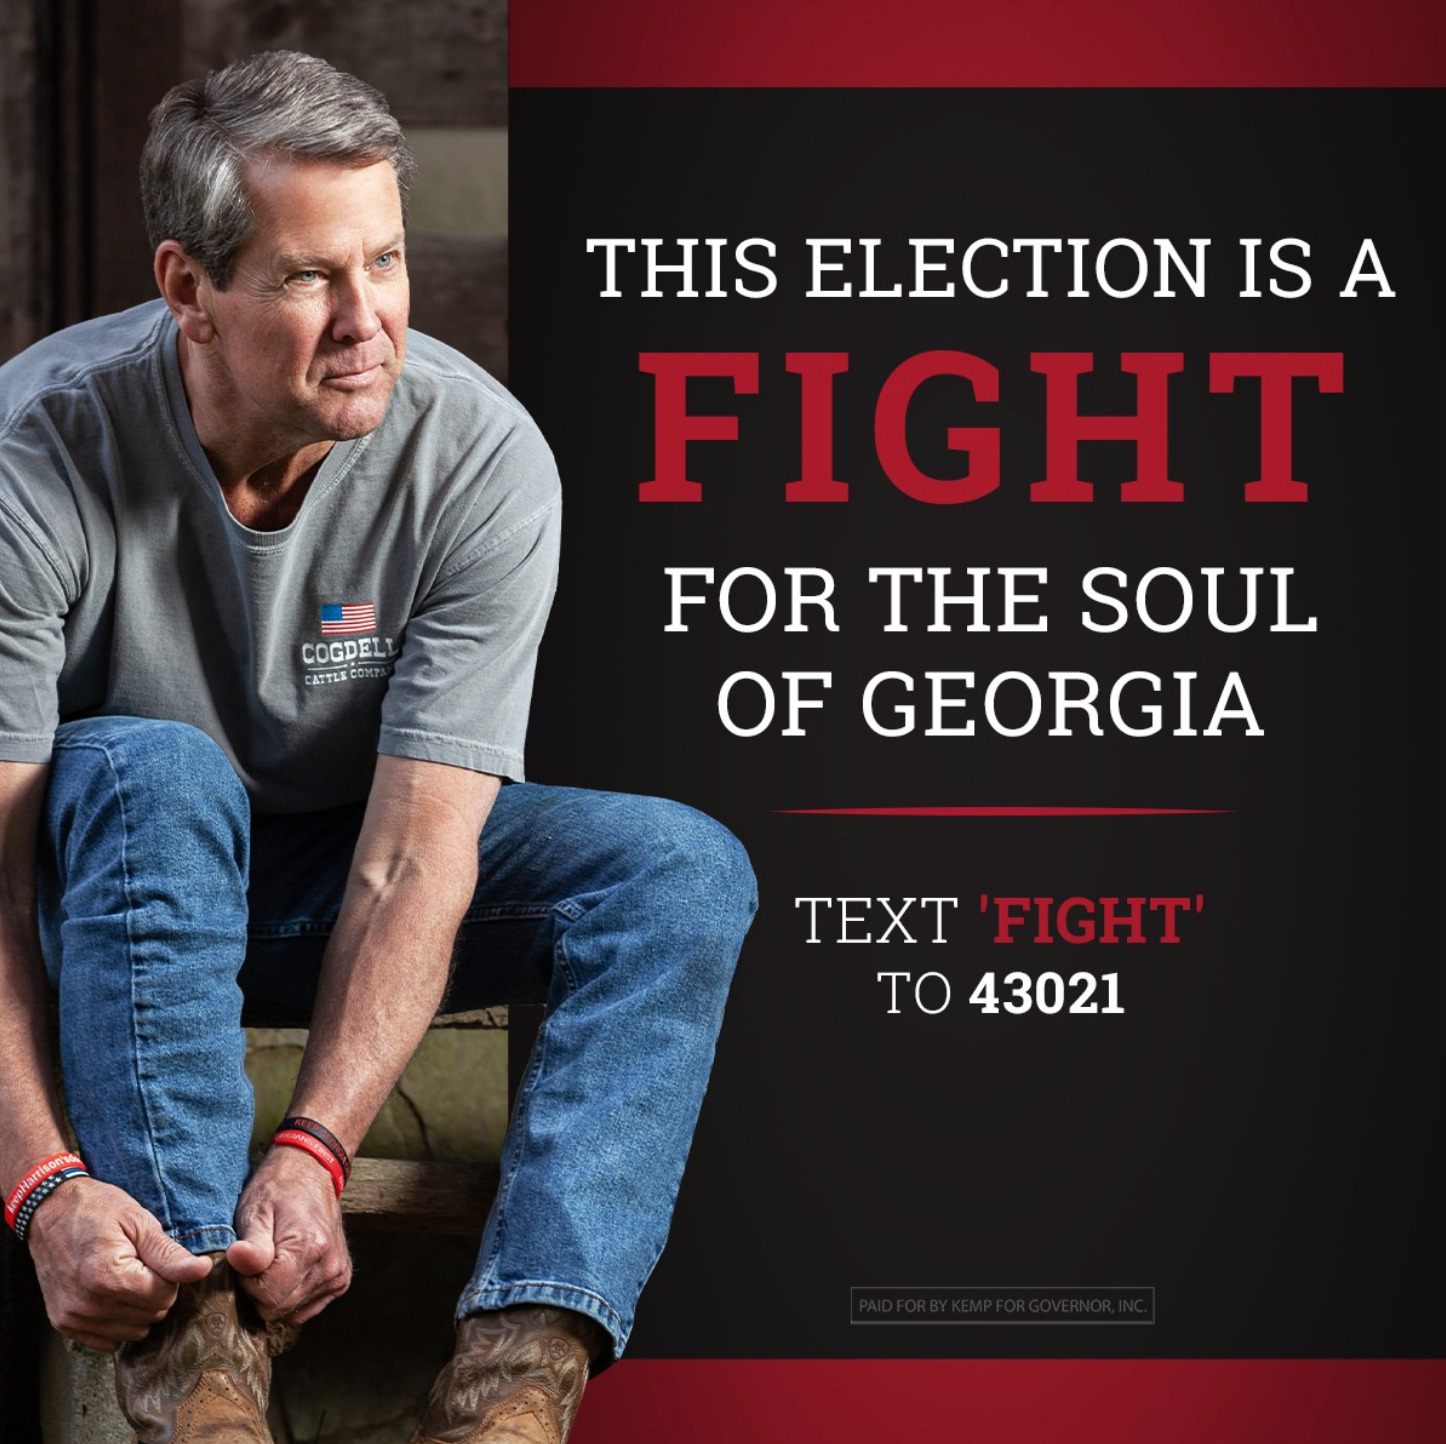 In campaign ads online, Gov. Brian Kemp is pictured in a shirt with a logo from Cogdell Cattle Company.